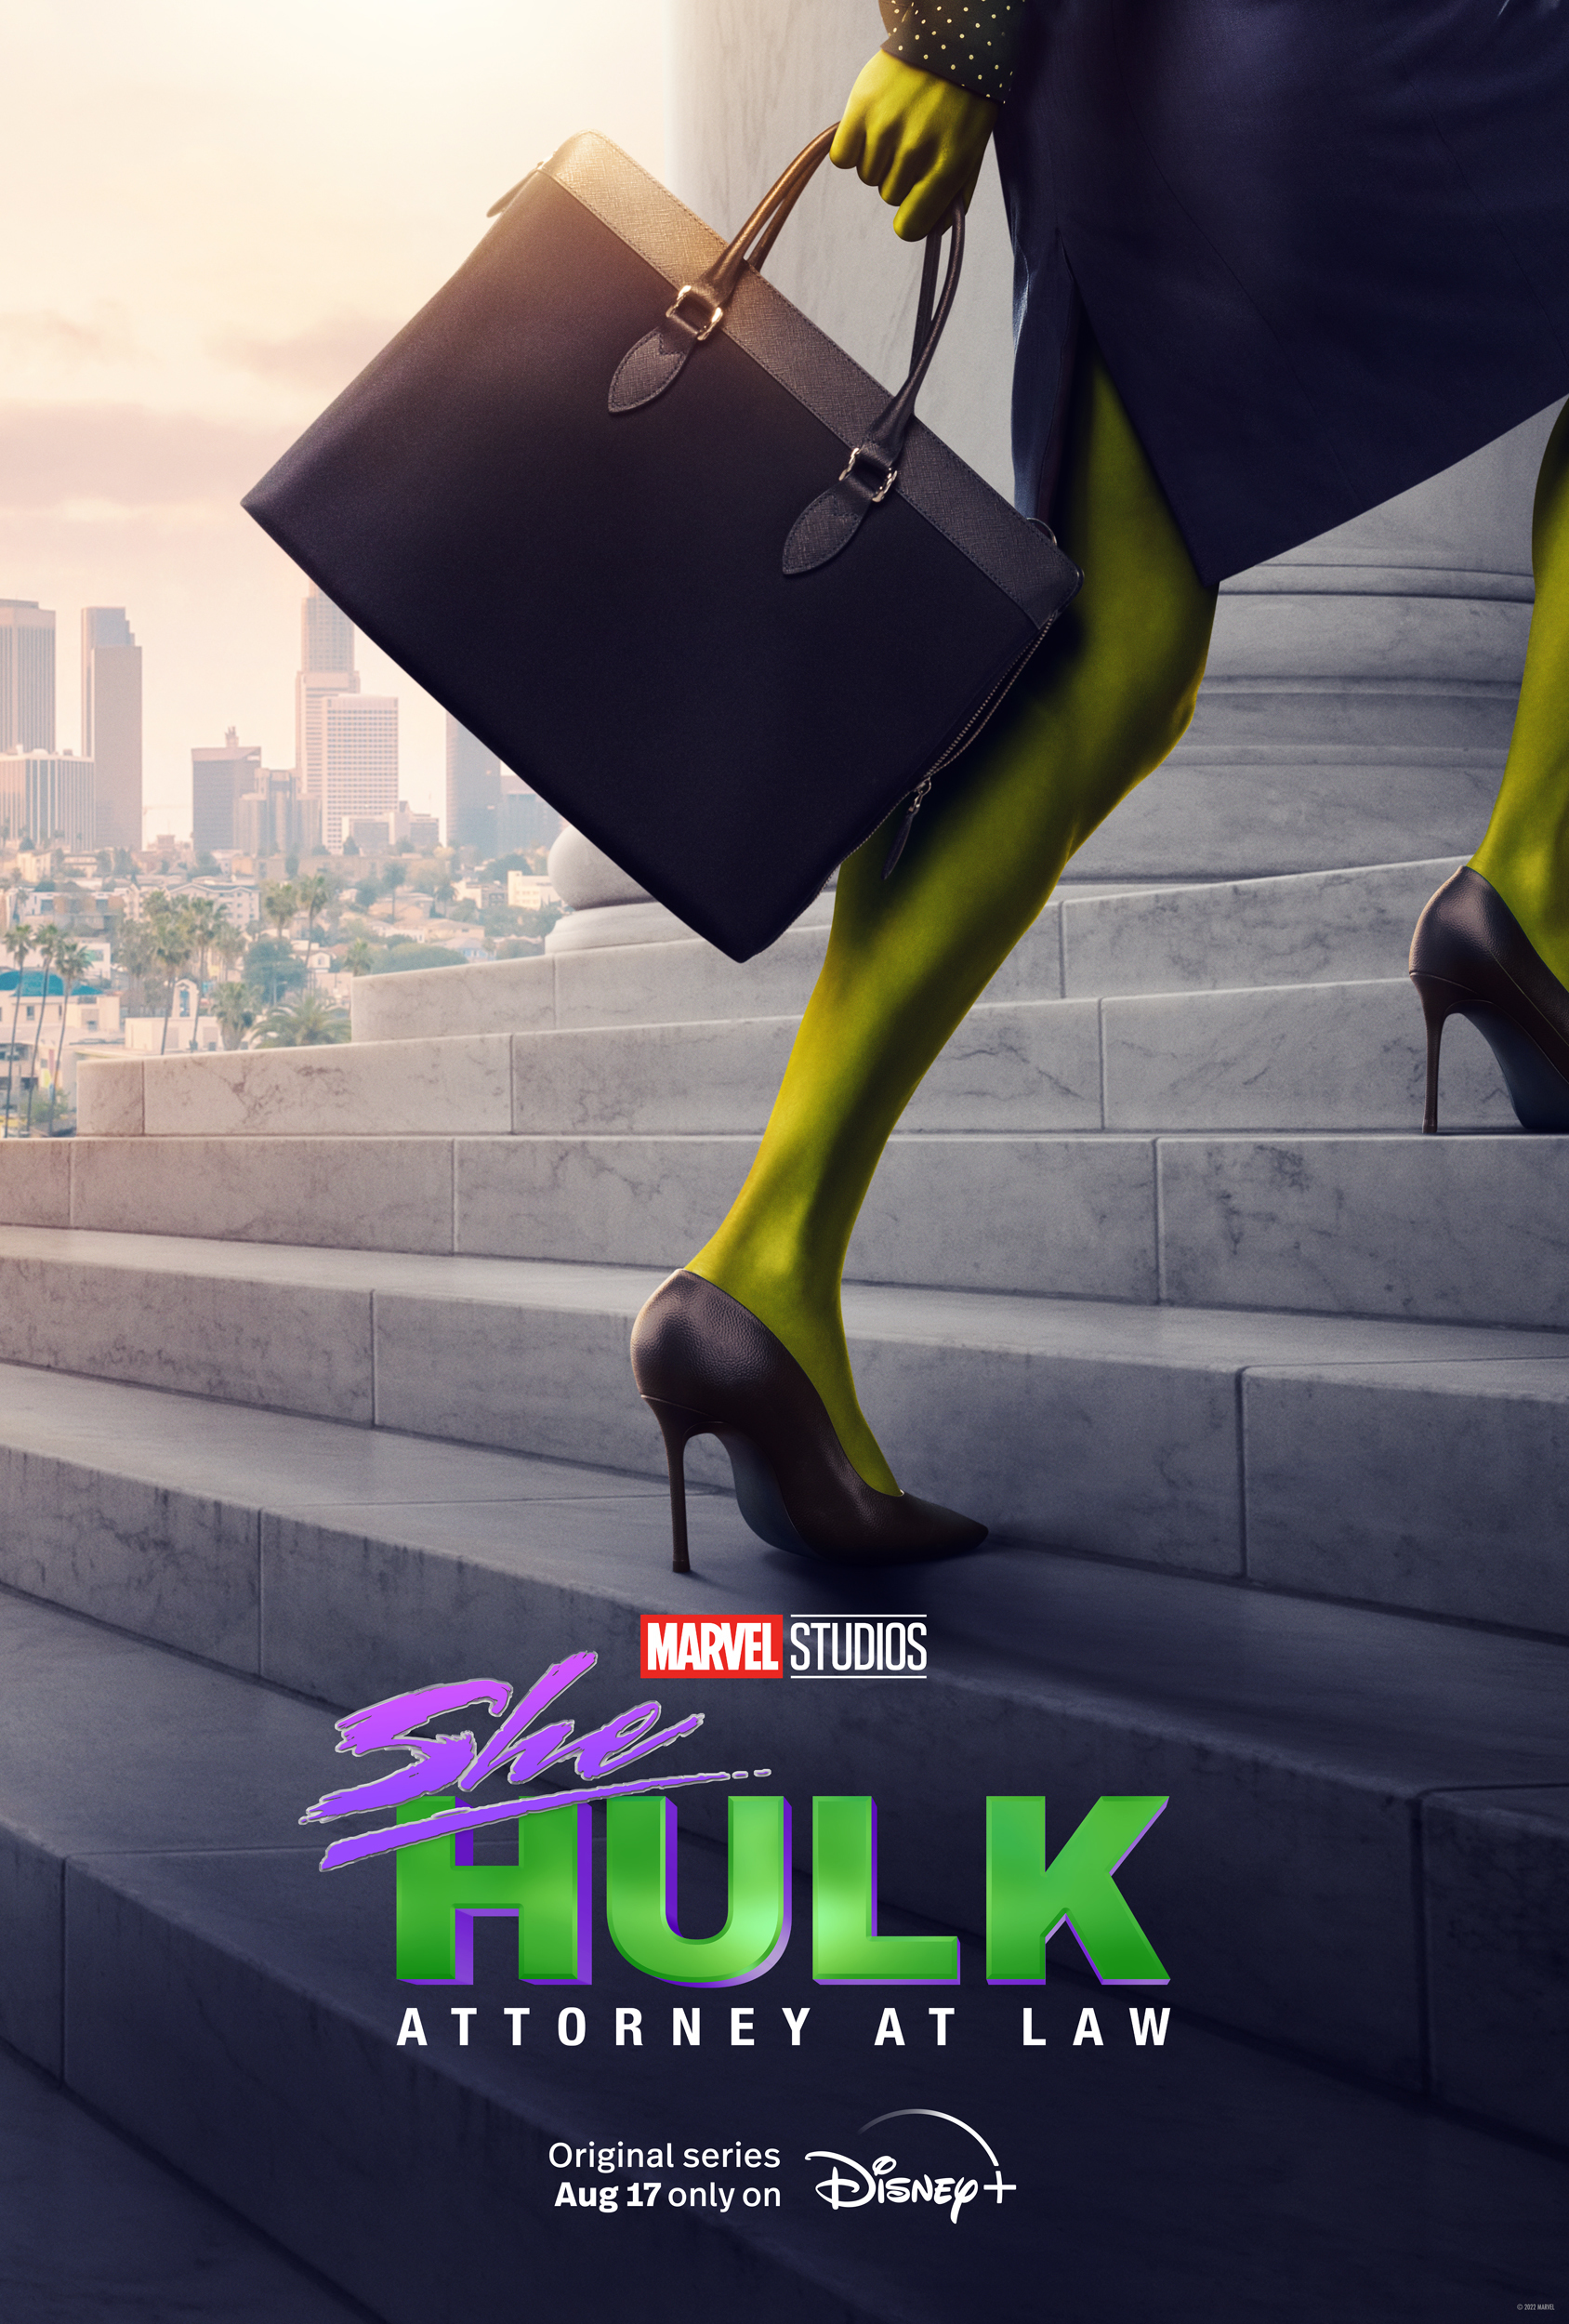 Disney+ Releases For Marvel Studios' “She Hulk: Attorney At Law” Premiering August 17